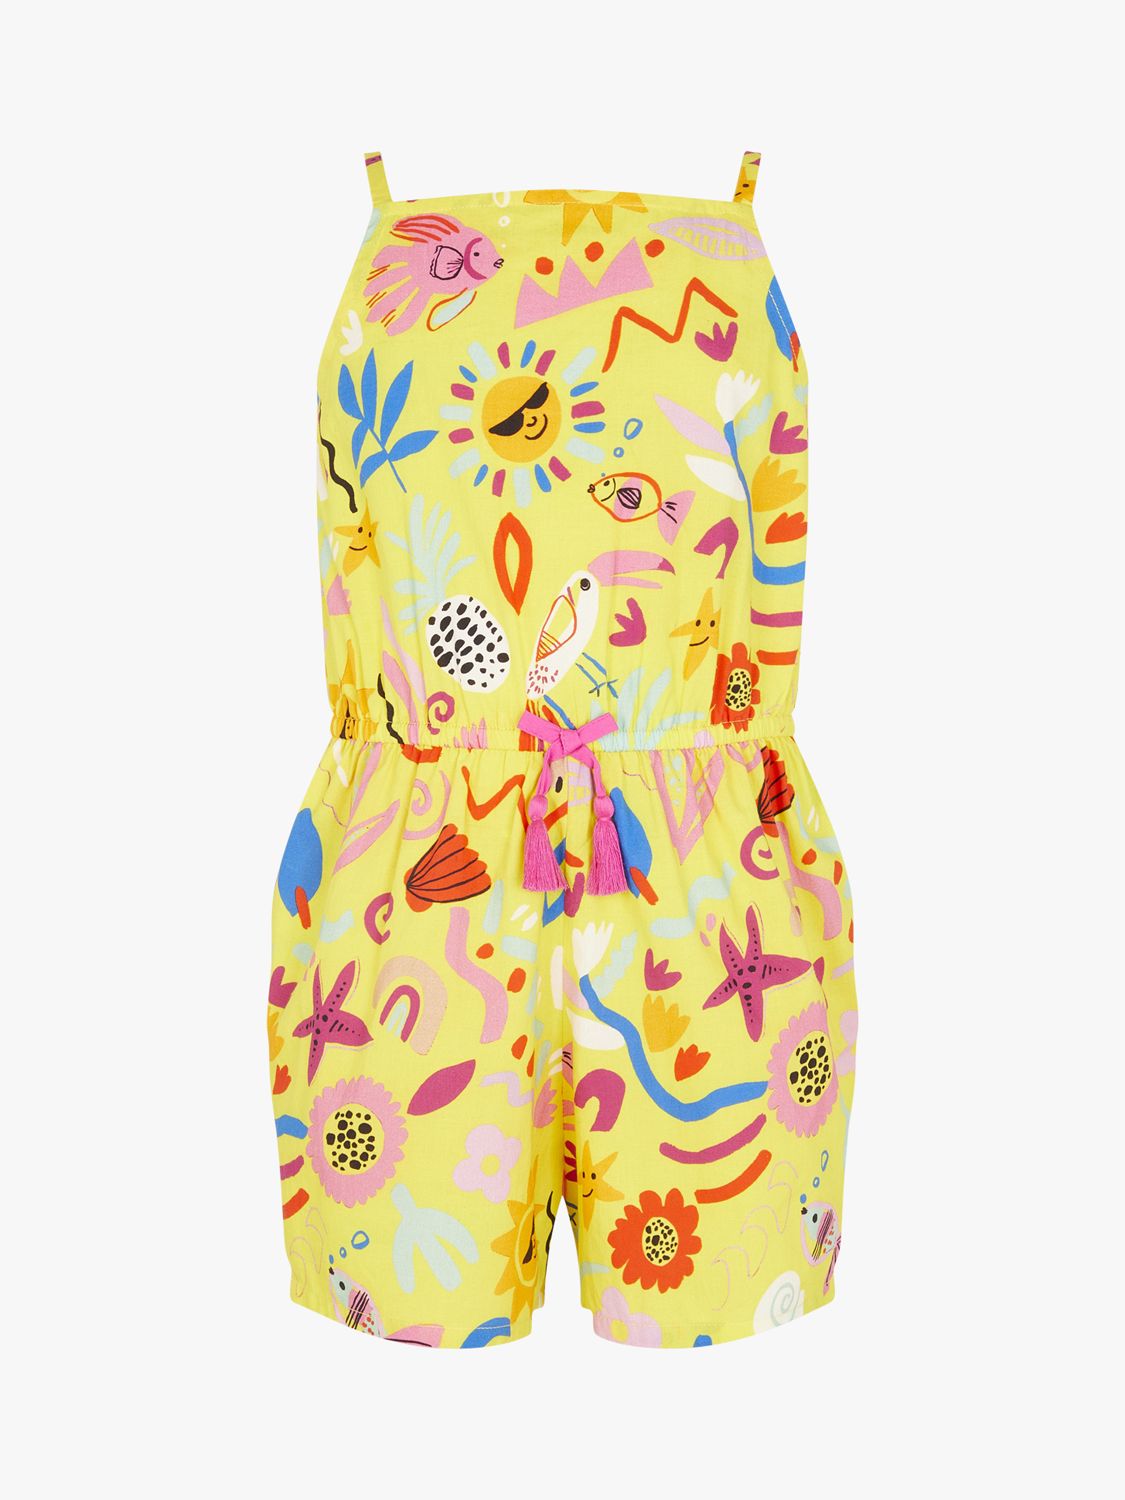 Angels by Accessorize Kids' Sunshine Print Cotton Playsuit, Yellow/Multi, 5-6 years